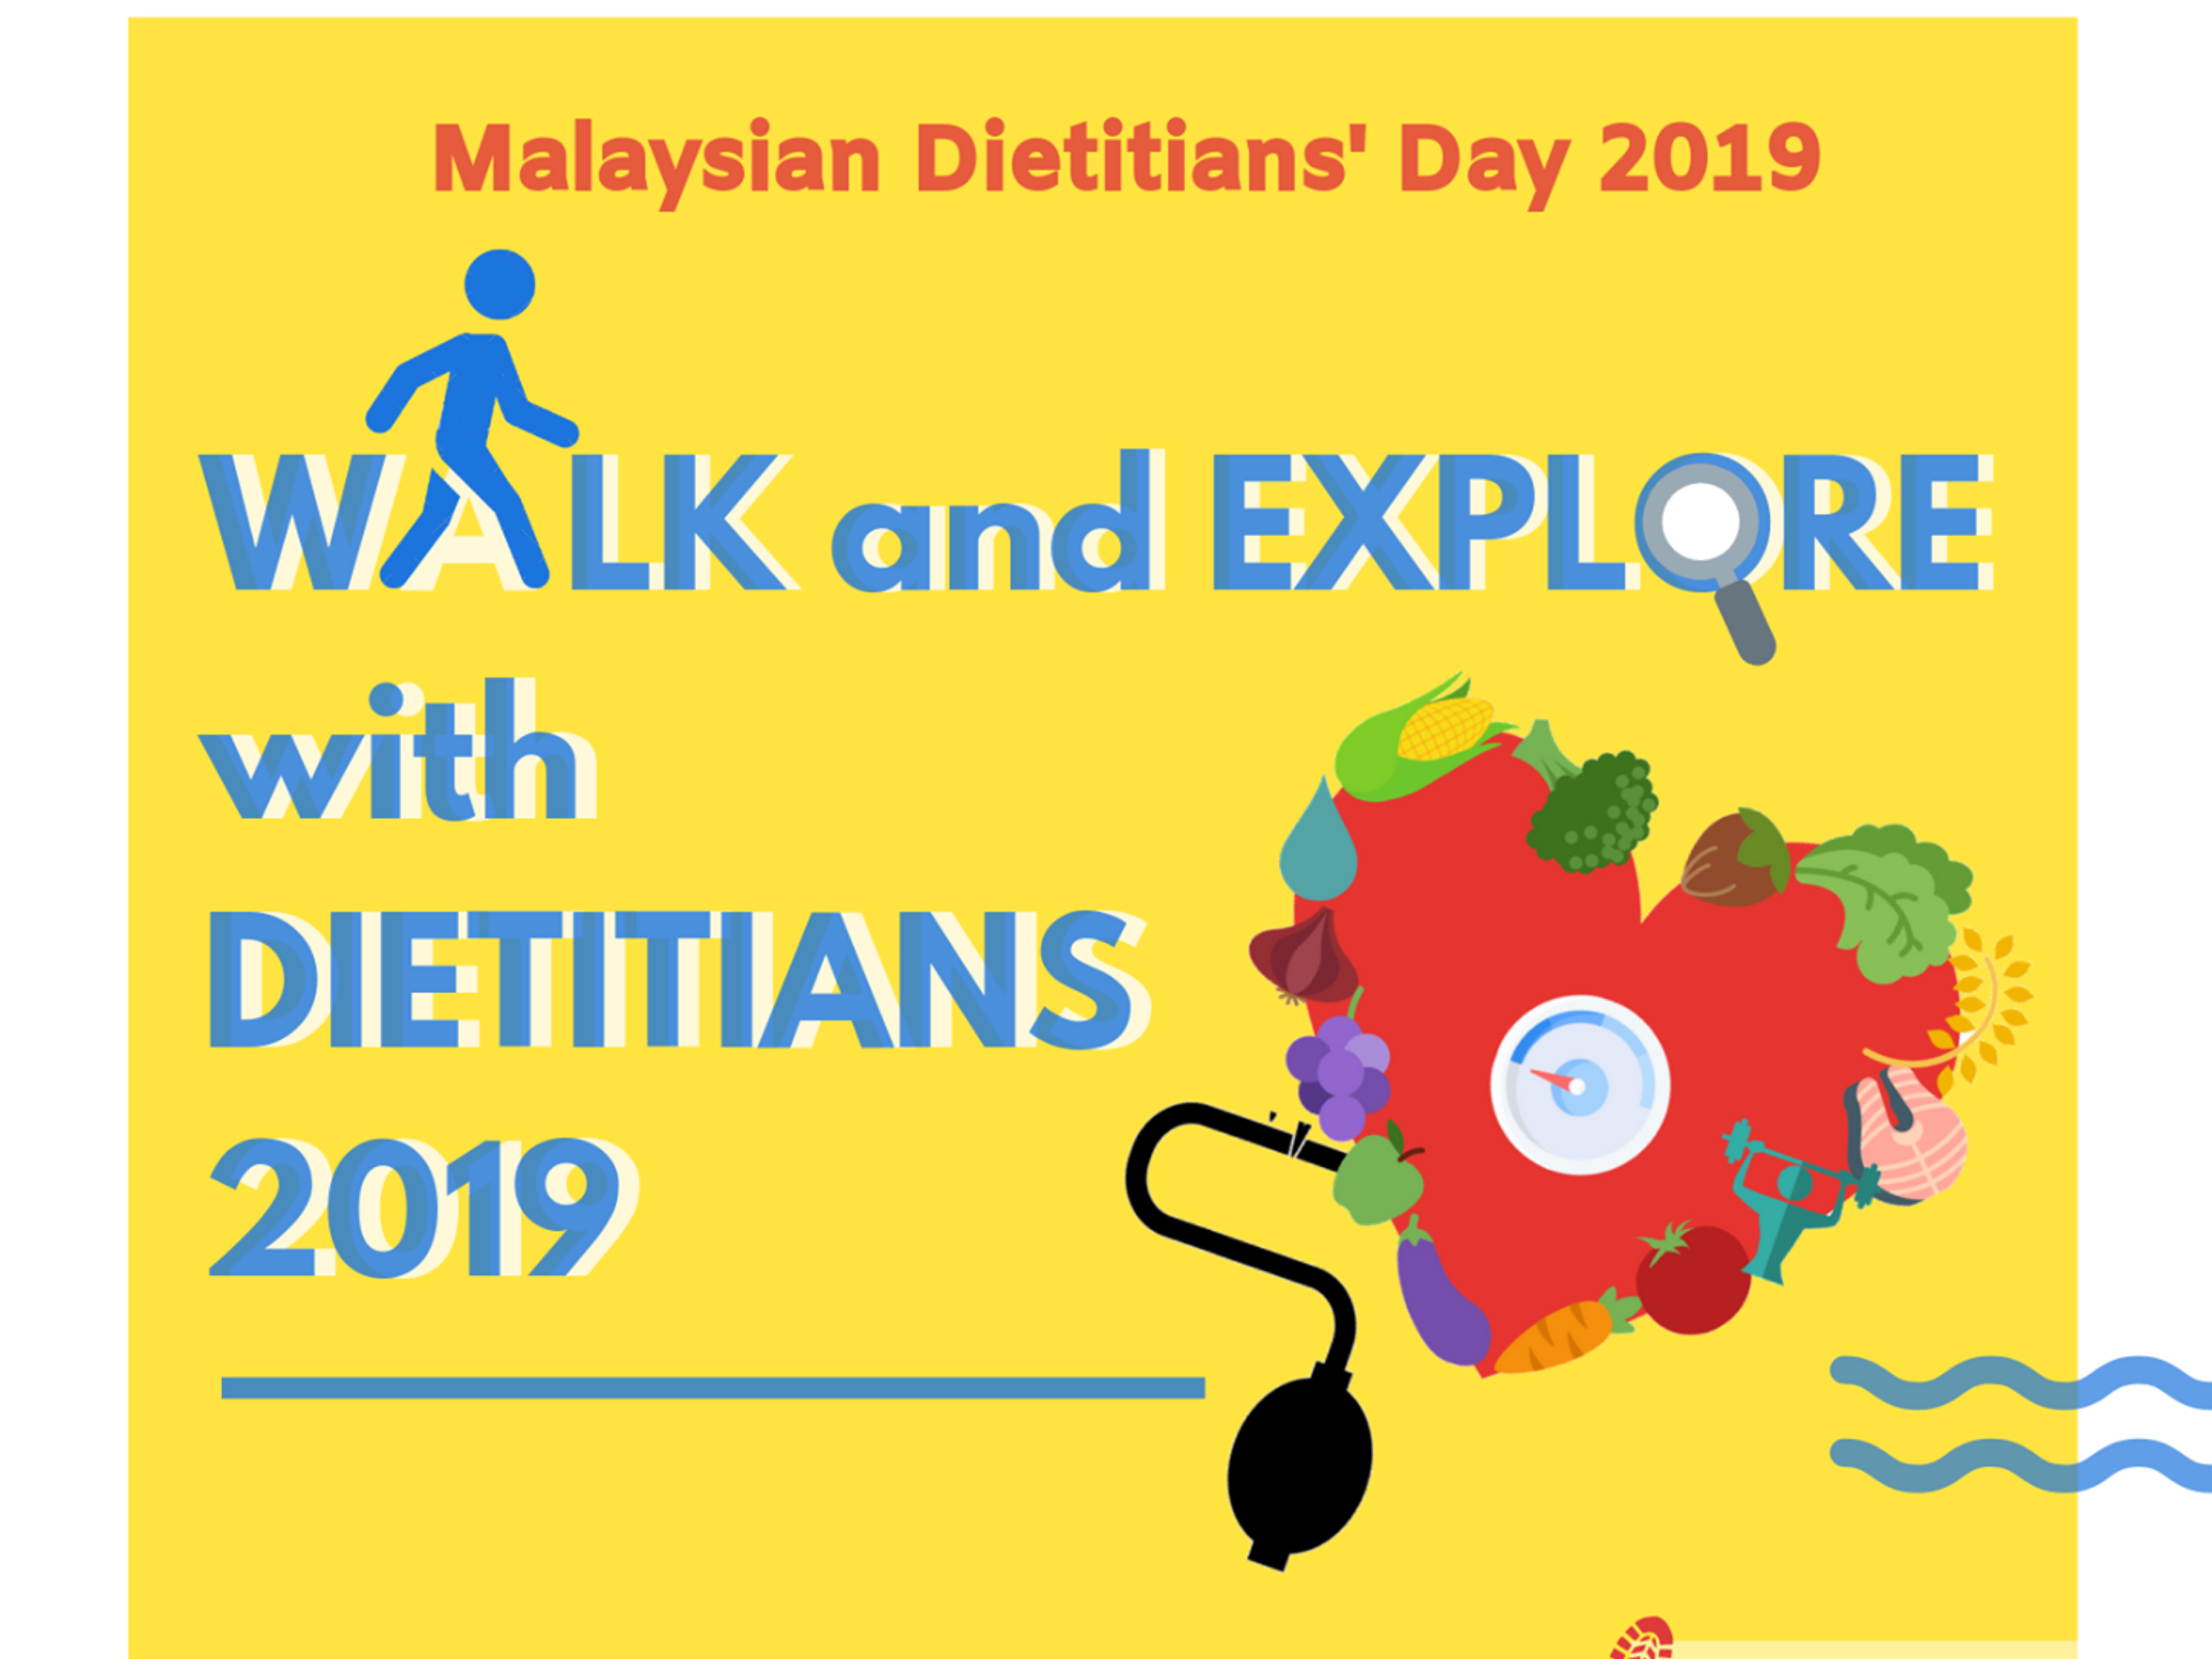 Walk and Explore with Dietitians